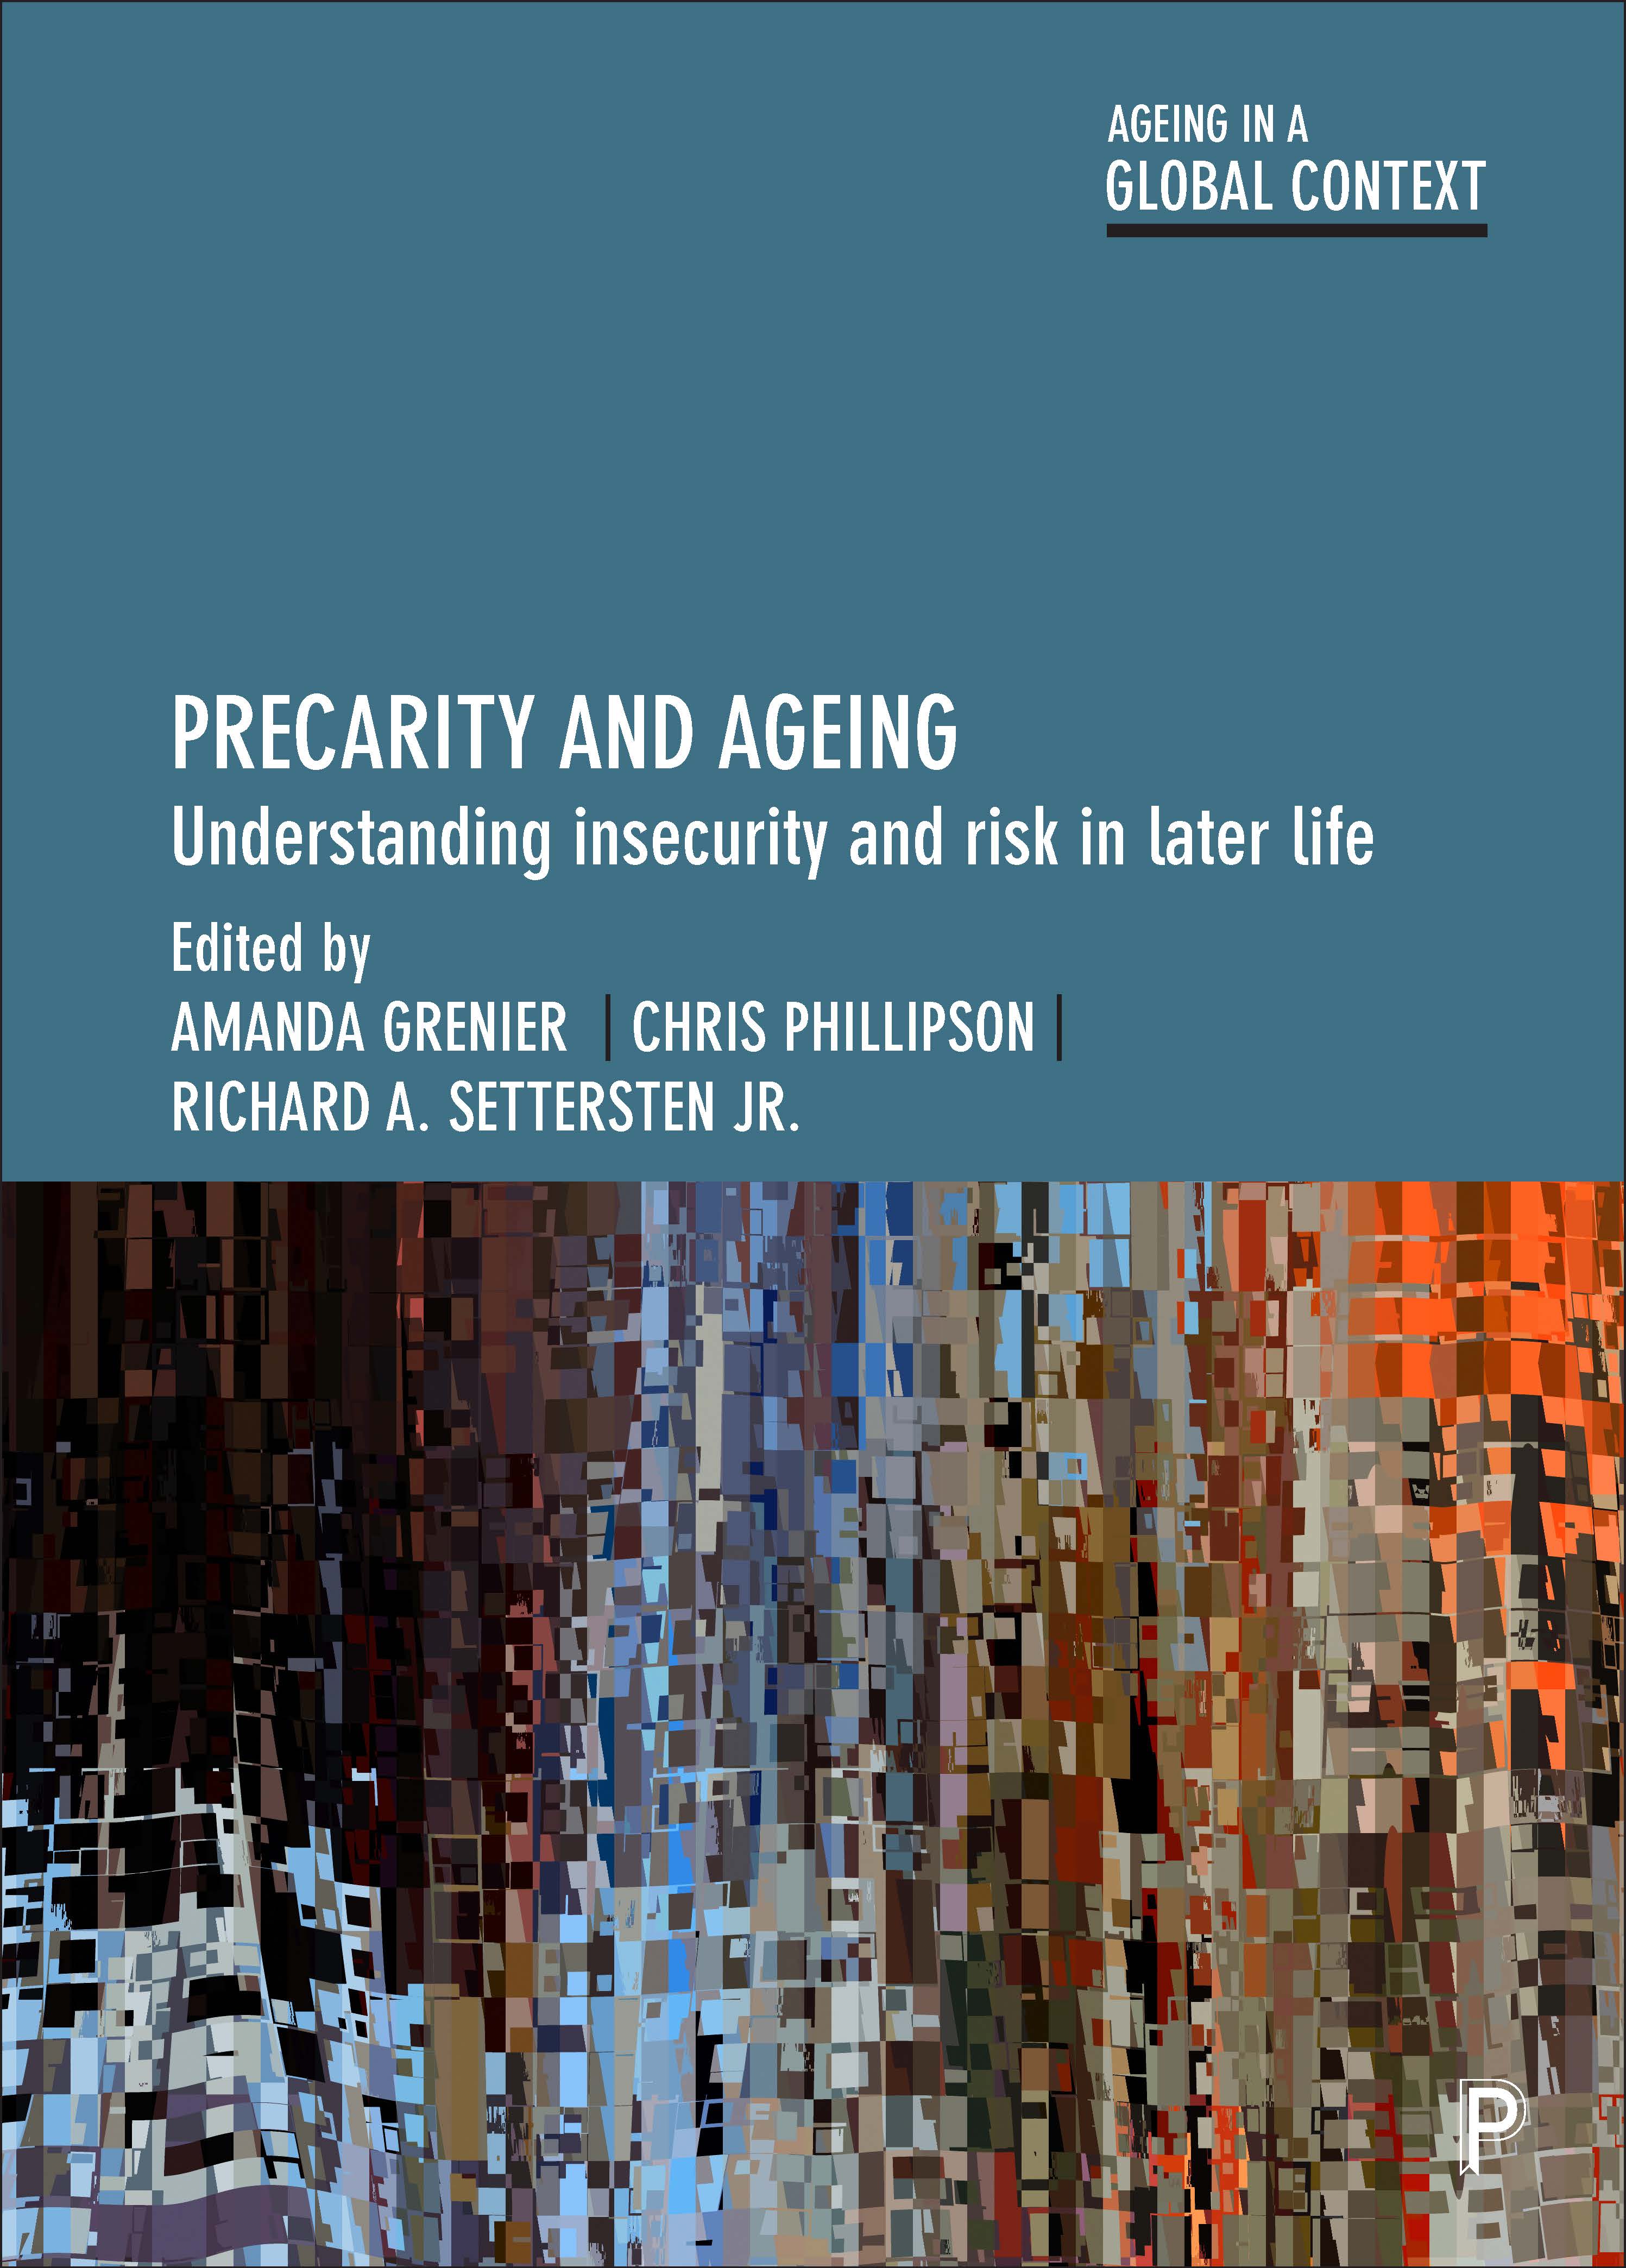 Precarity and Aging: Understanding changing forms of risk and vulnerability in later life